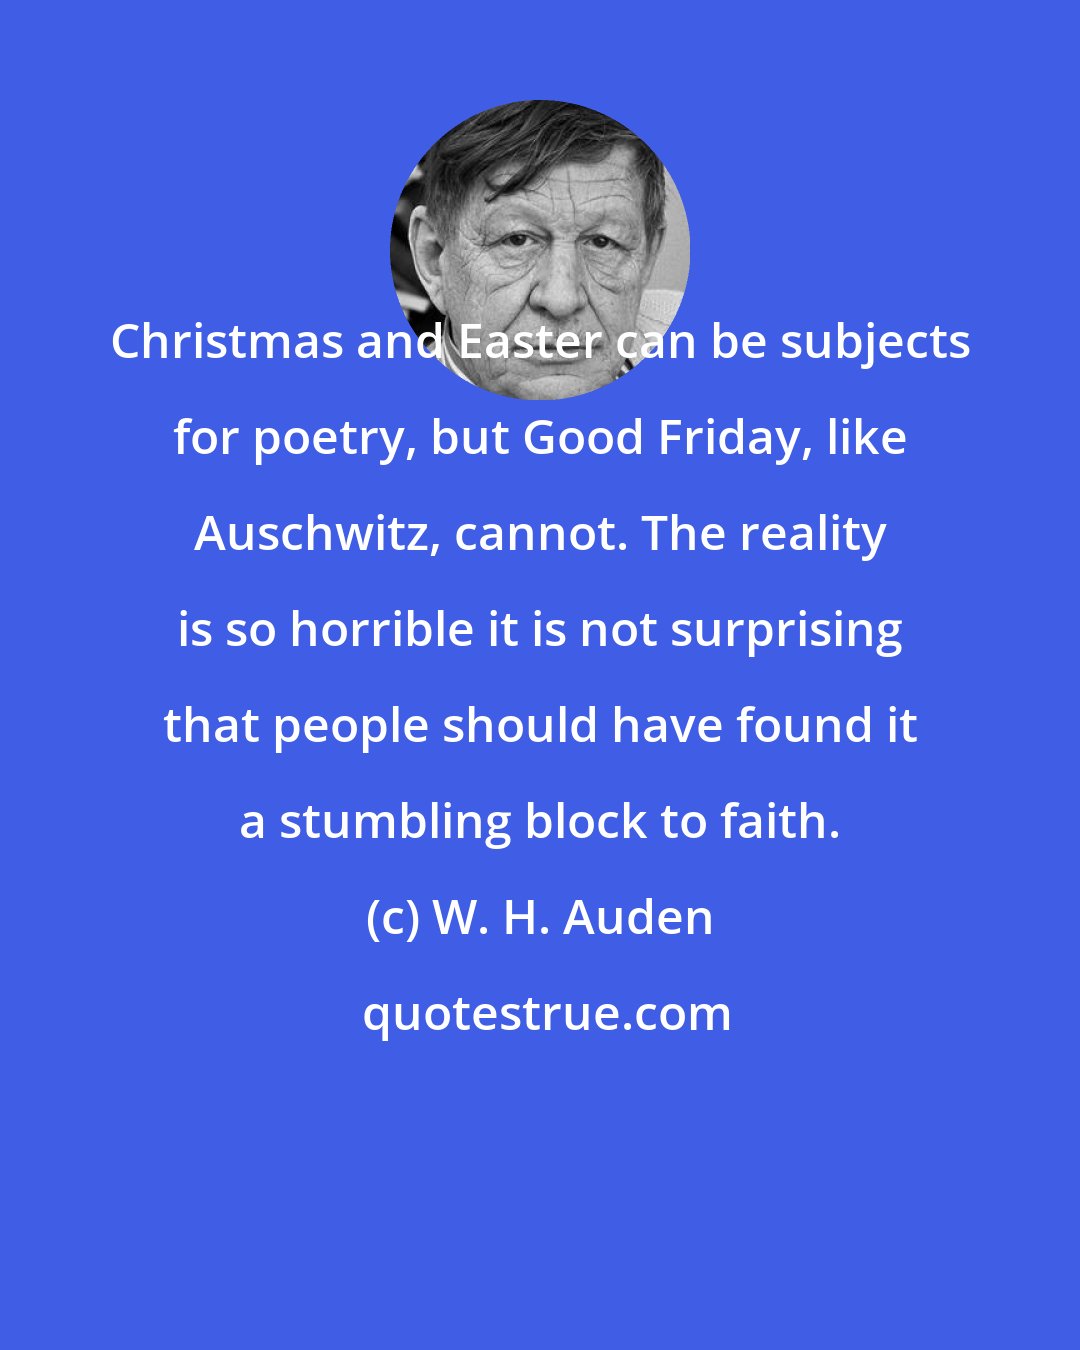 W. H. Auden: Christmas and Easter can be subjects for poetry, but Good Friday, like Auschwitz, cannot. The reality is so horrible it is not surprising that people should have found it a stumbling block to faith.